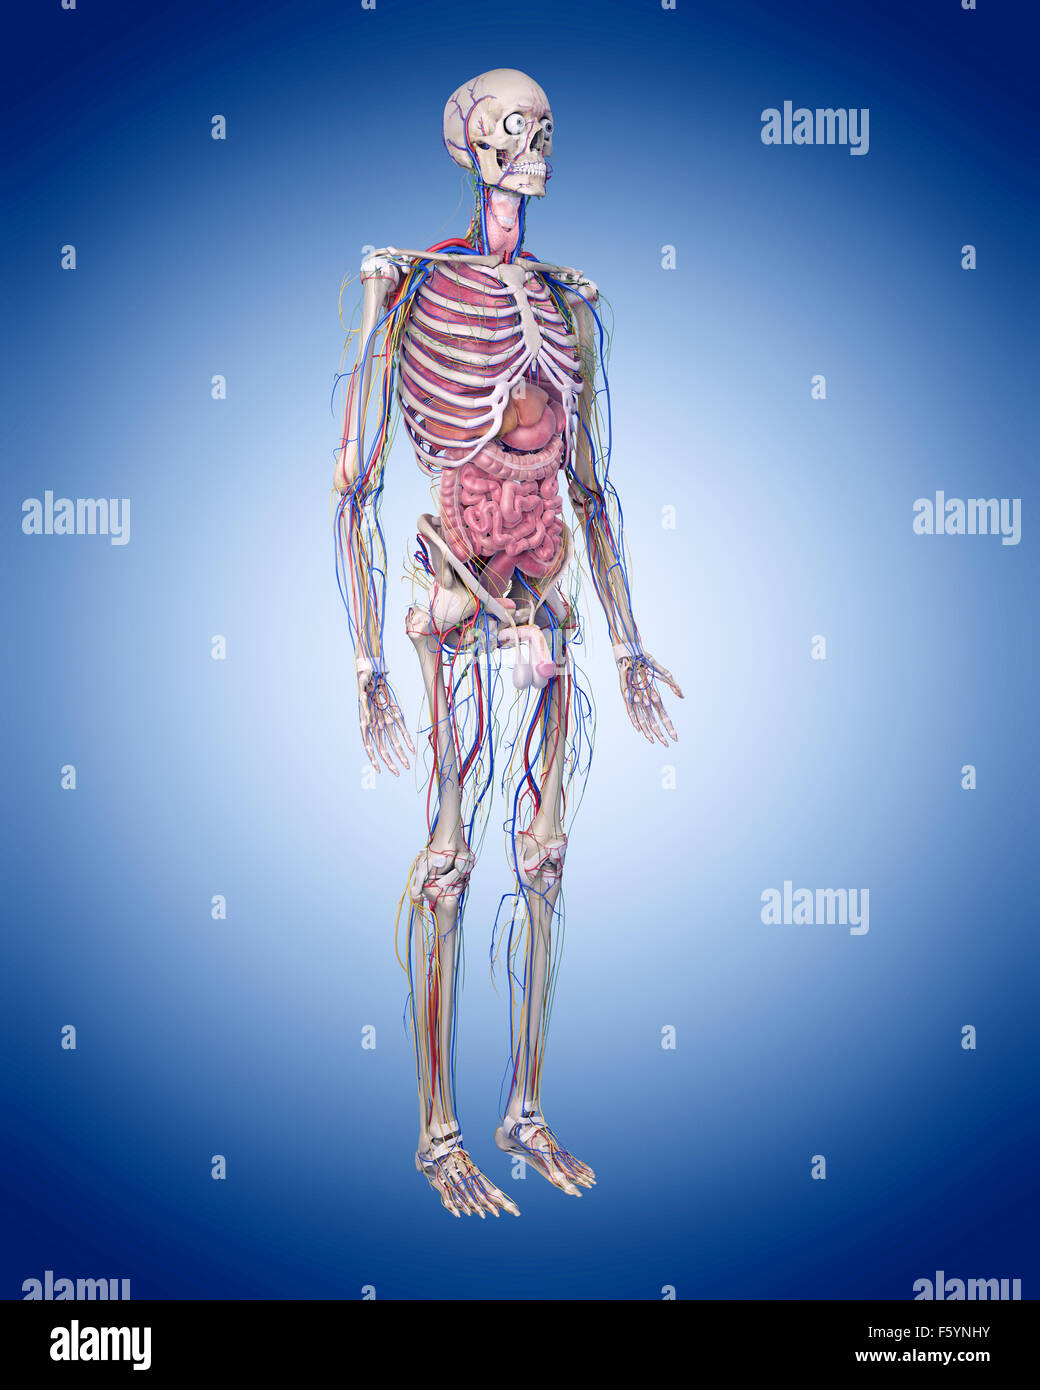 medically accurate illustration of the human anatomy Stock Photo